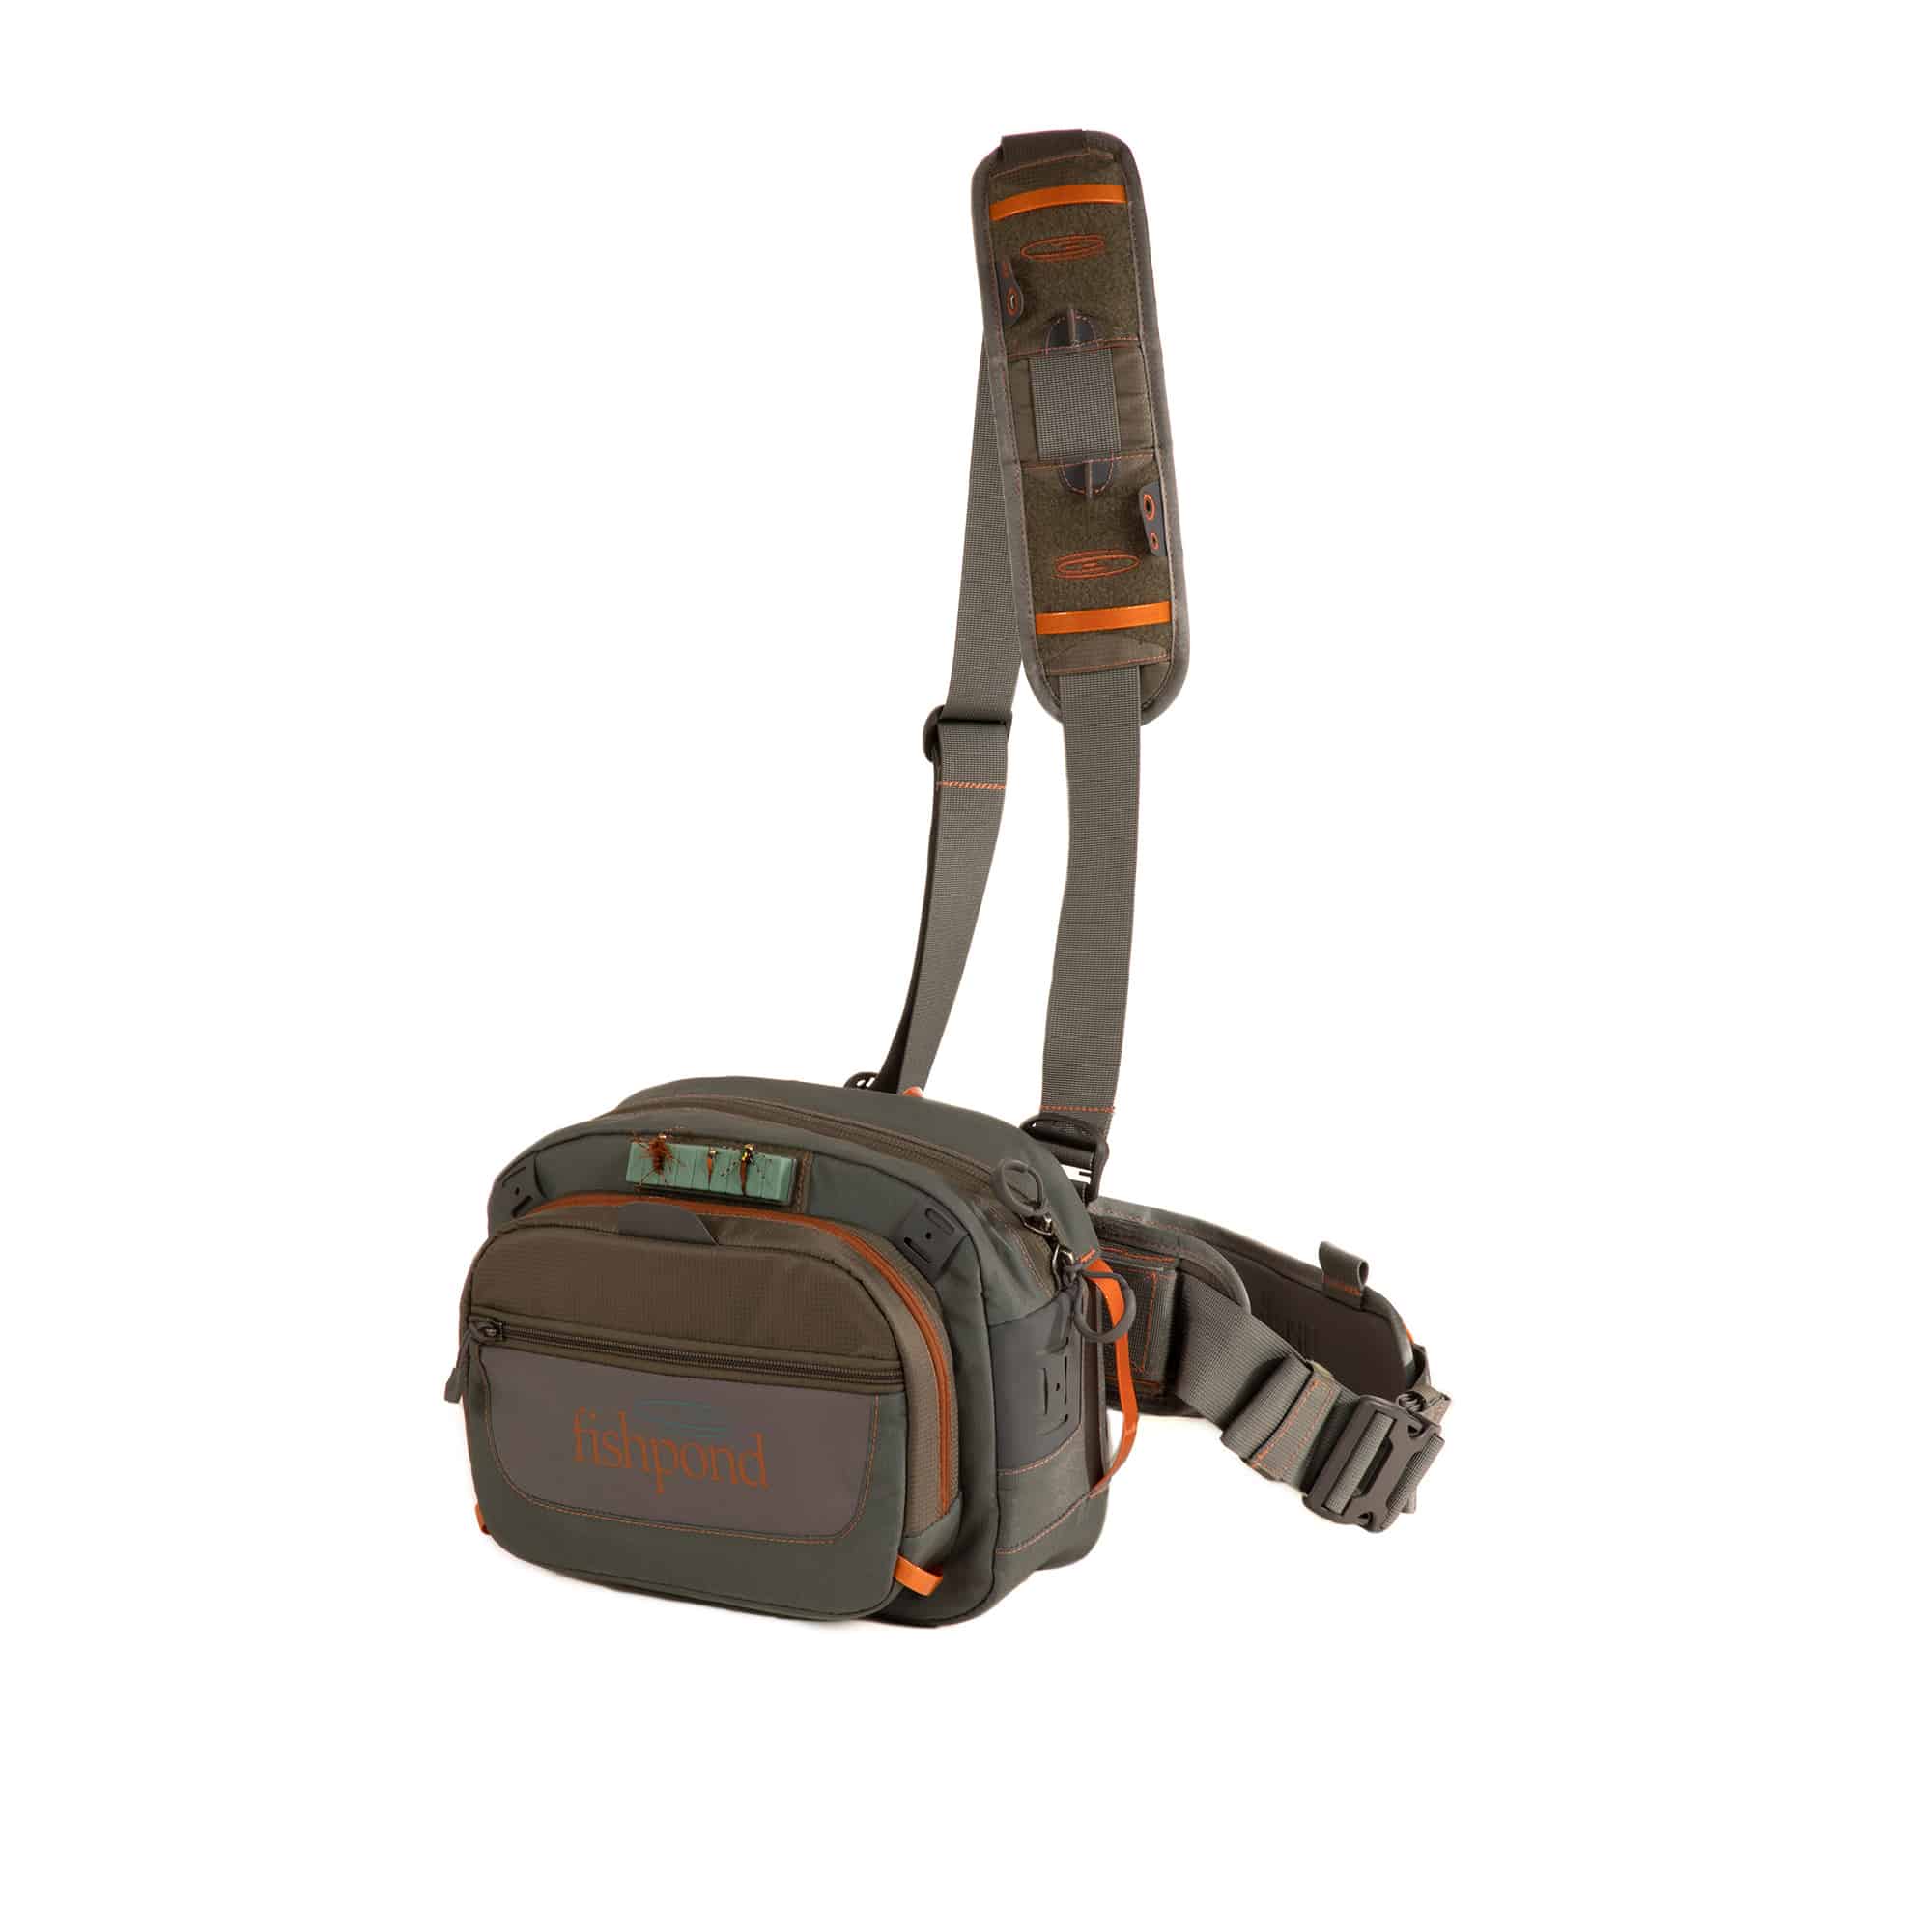 The Large Gear Bag - Guideline Fly Fishing Bags